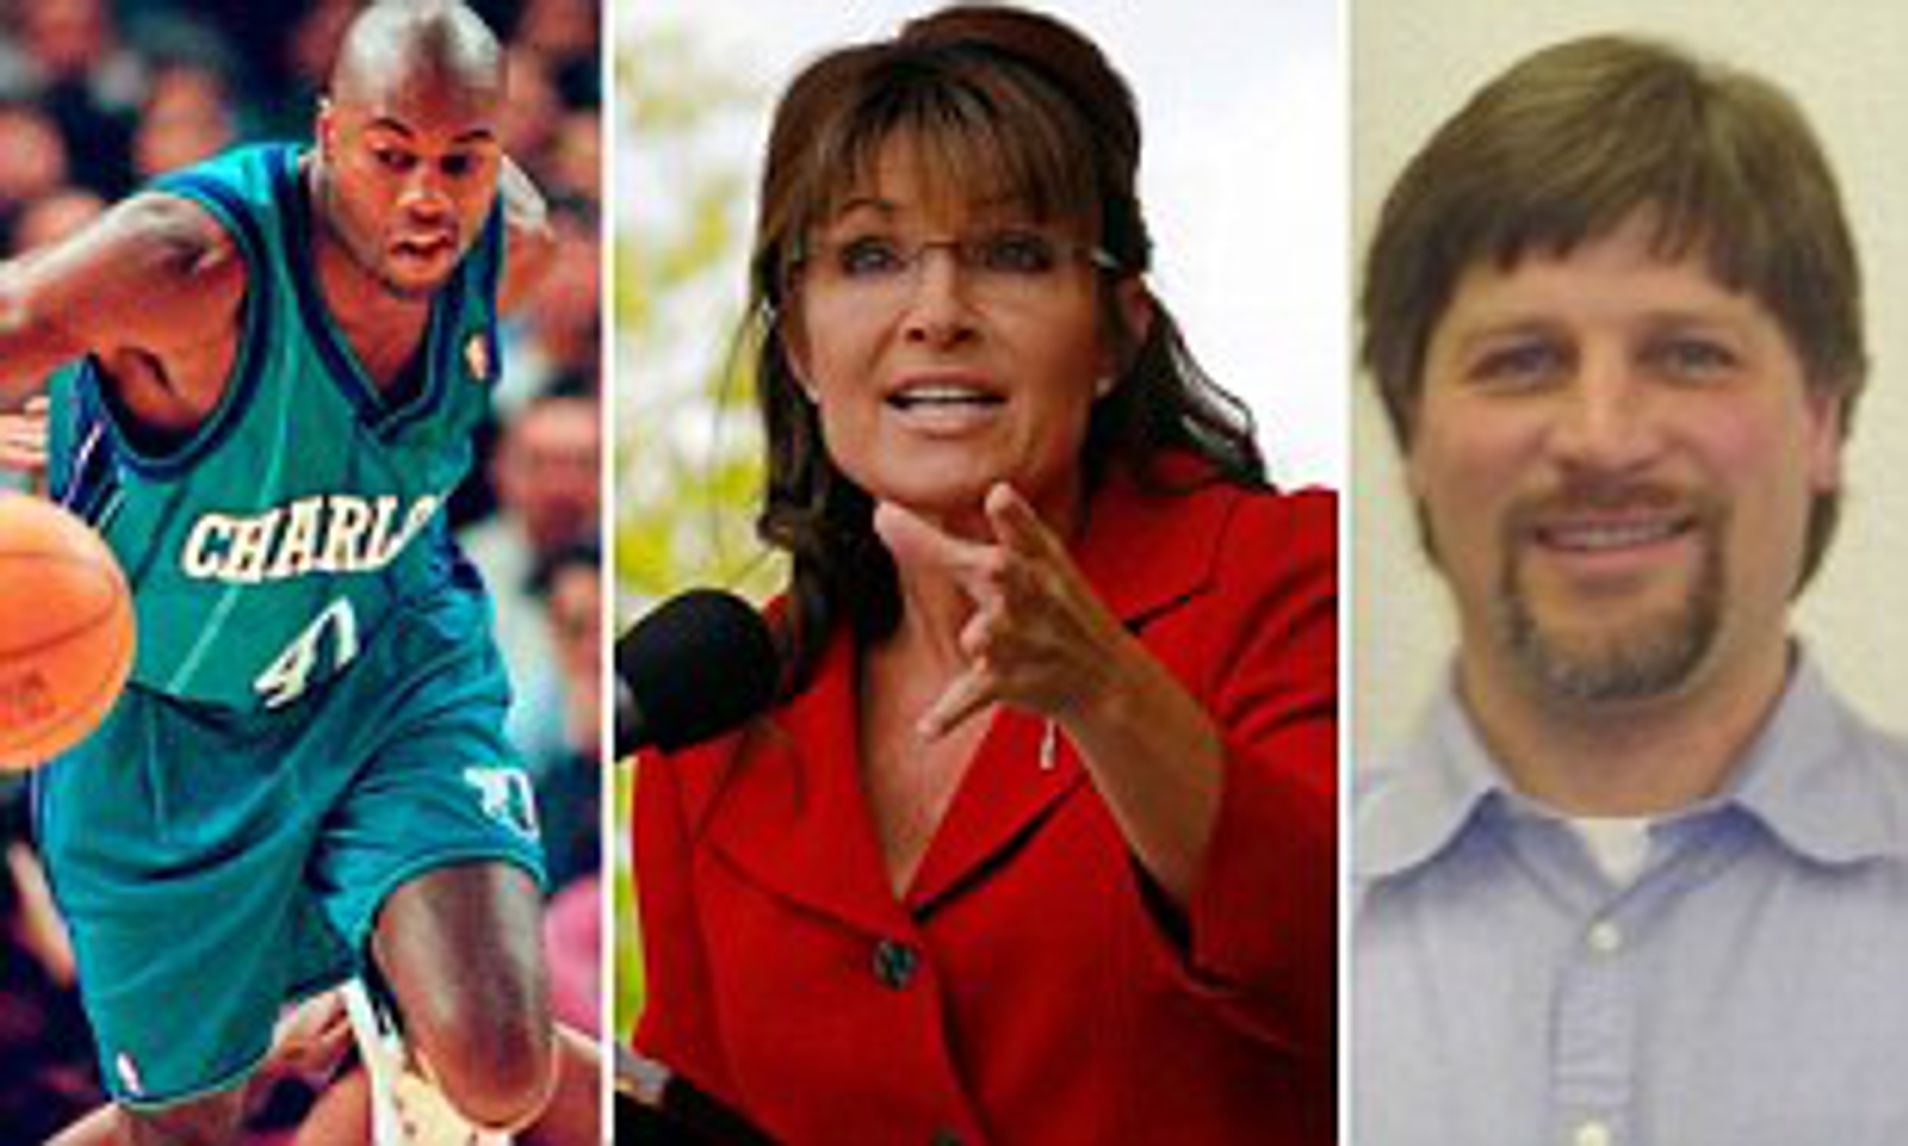 charlie robba recommends sarah palin scandal photos pic